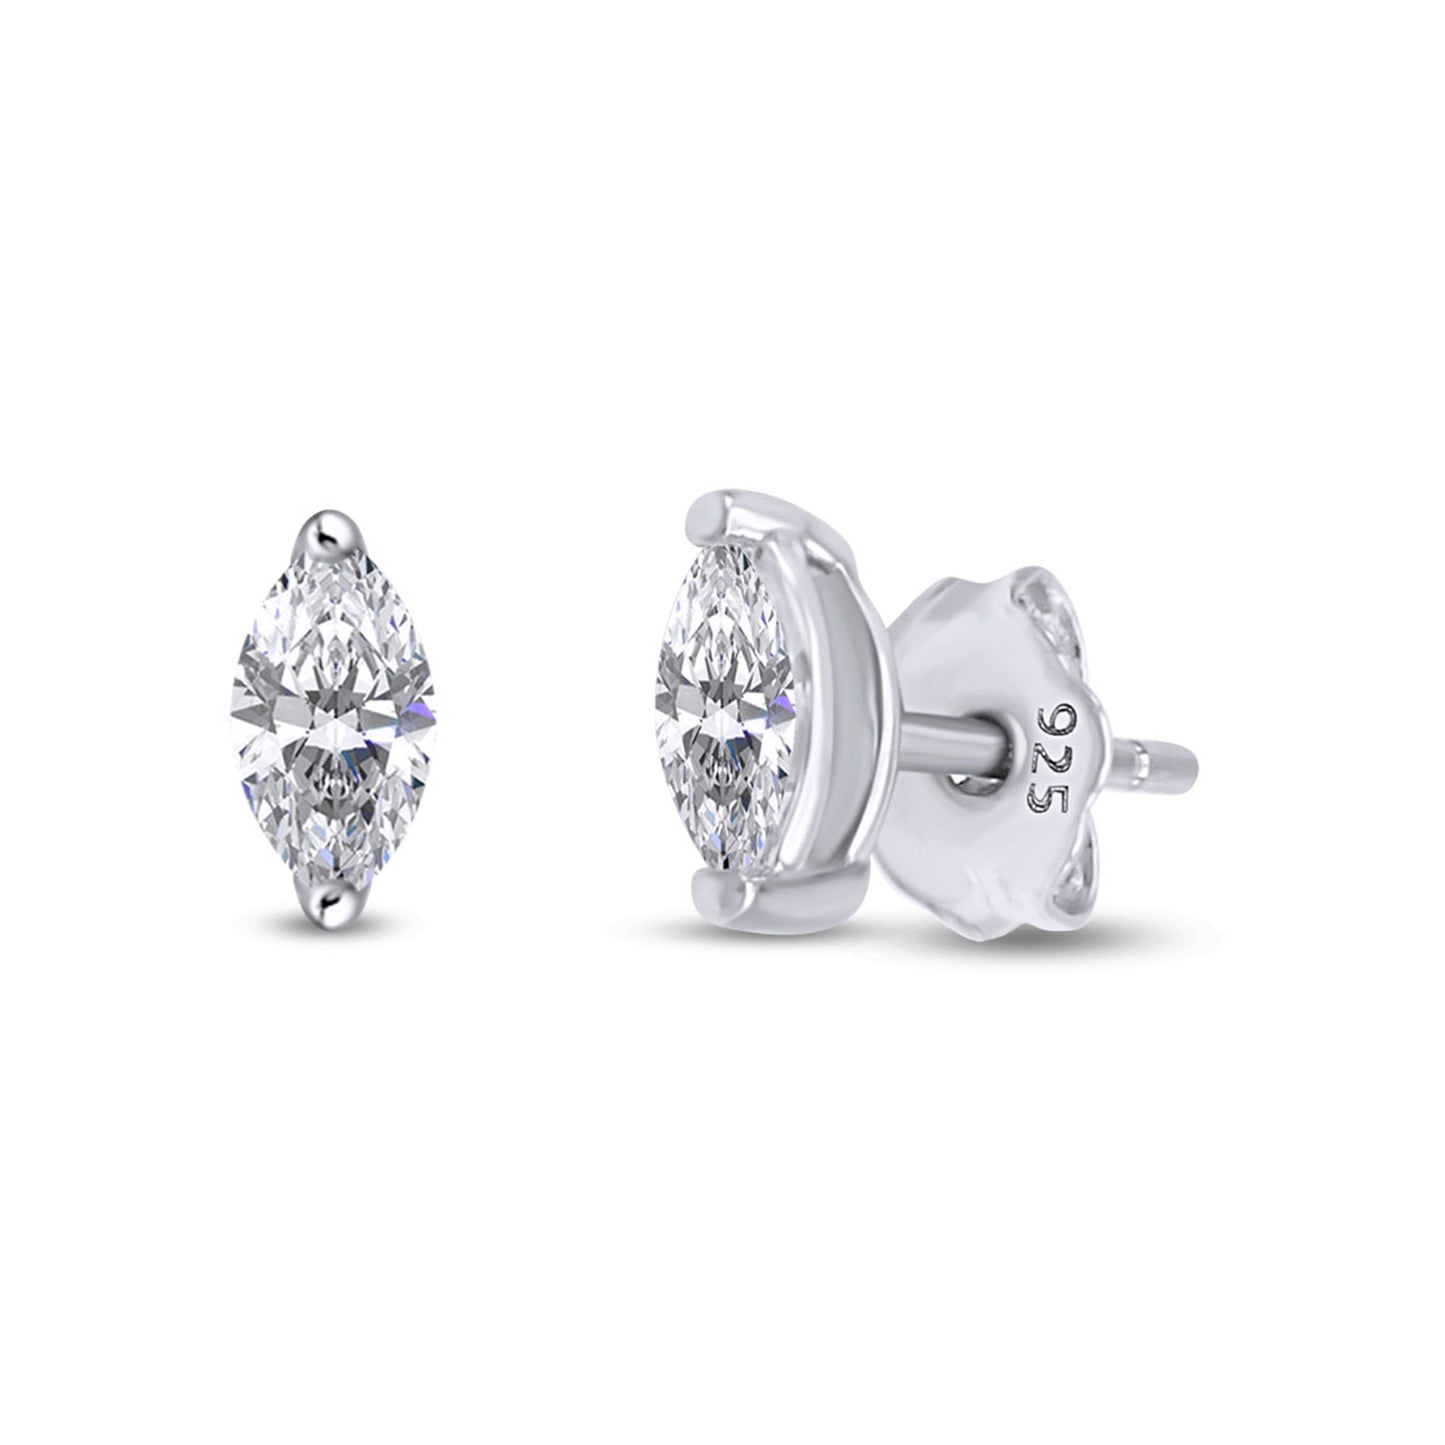 White Cubic Zirconia Marquise Frame Stud Earrings in 925 Sterling Silver with Push Back